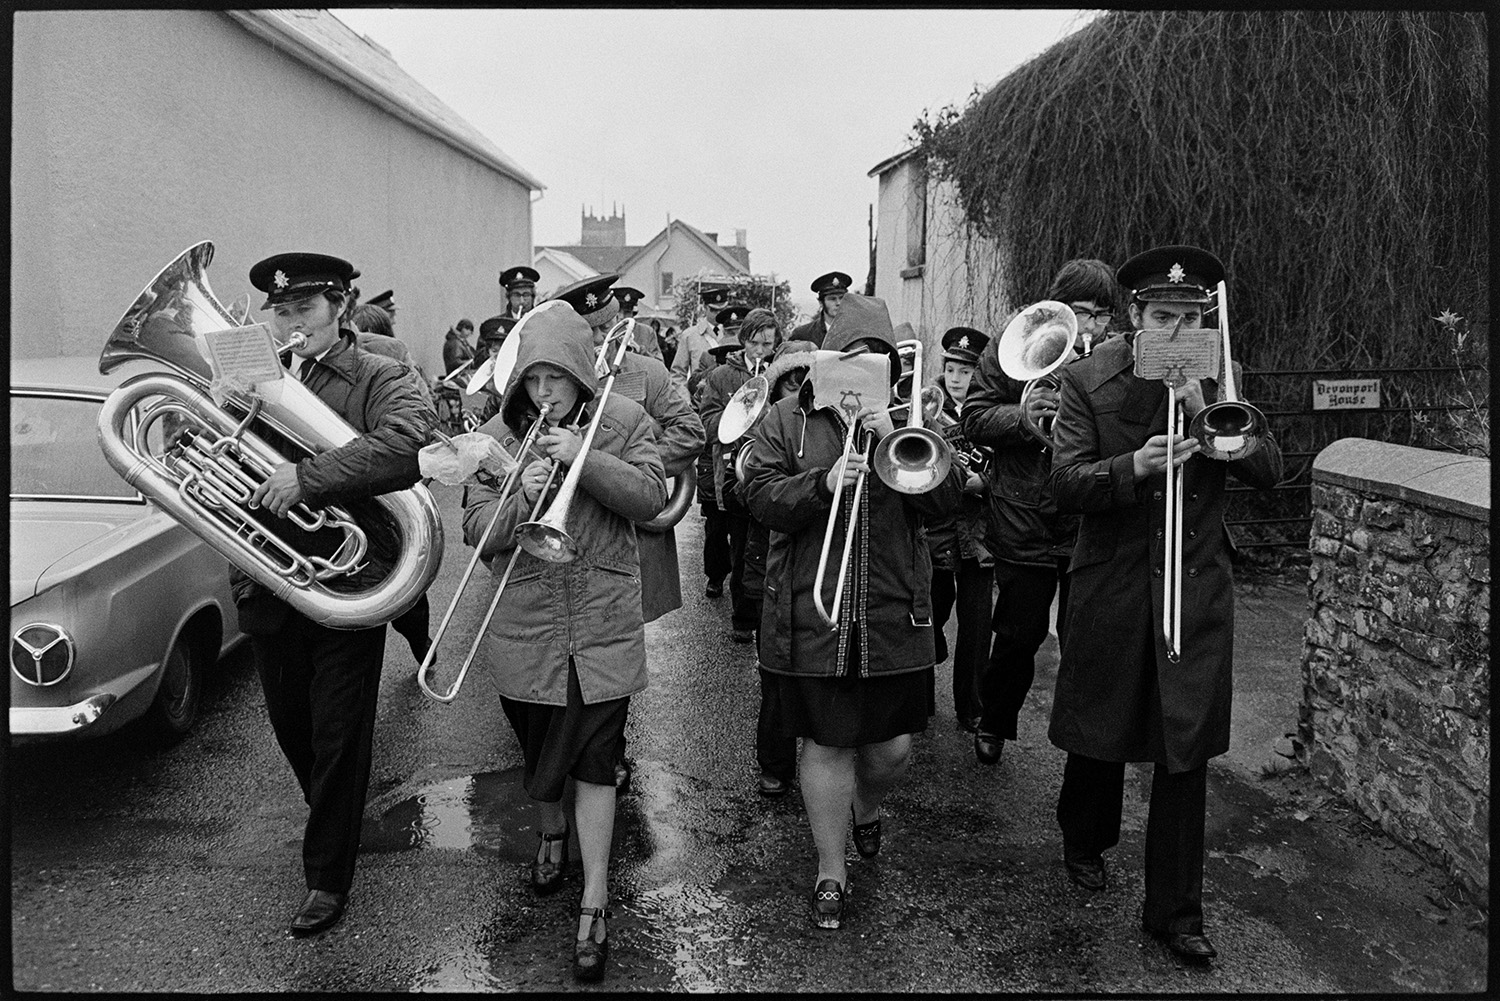 Brass band and fancy dress float at carnival marching through village. 
[A brass band marching along a street during Shebbear Carnival. The members are wearing coats to shield themselves from the rain.]